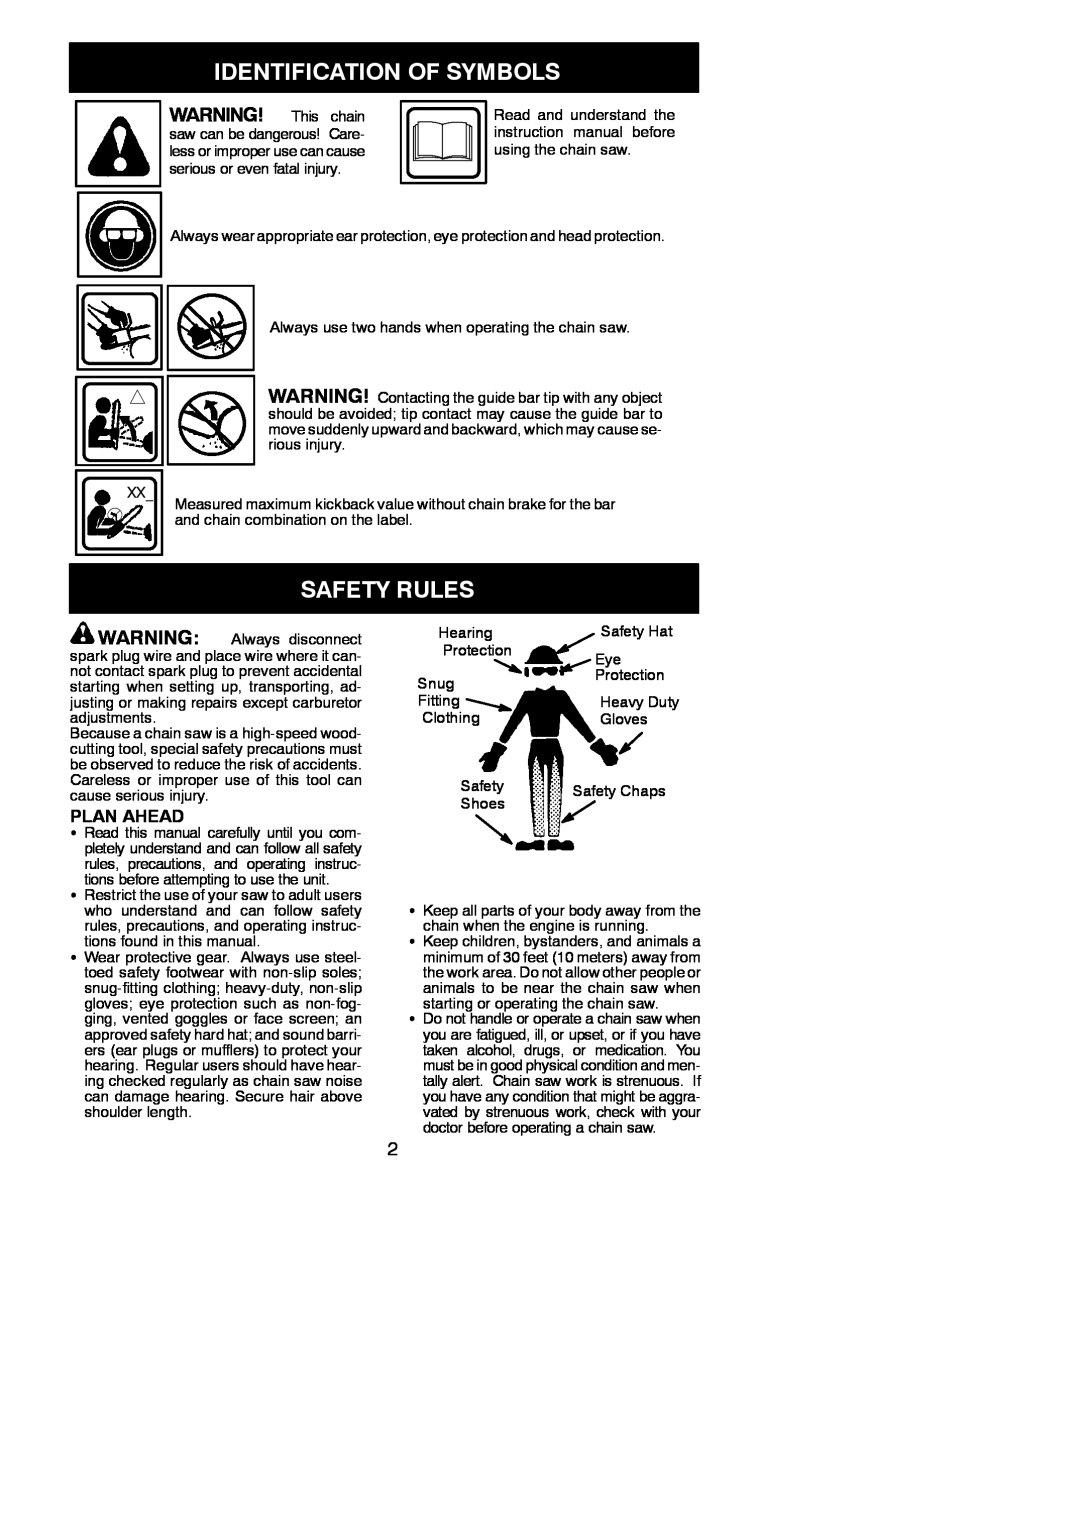 Poulan PP4218AVHD instruction manual Identification Of Symbols, Safety Rules, Plan Ahead 